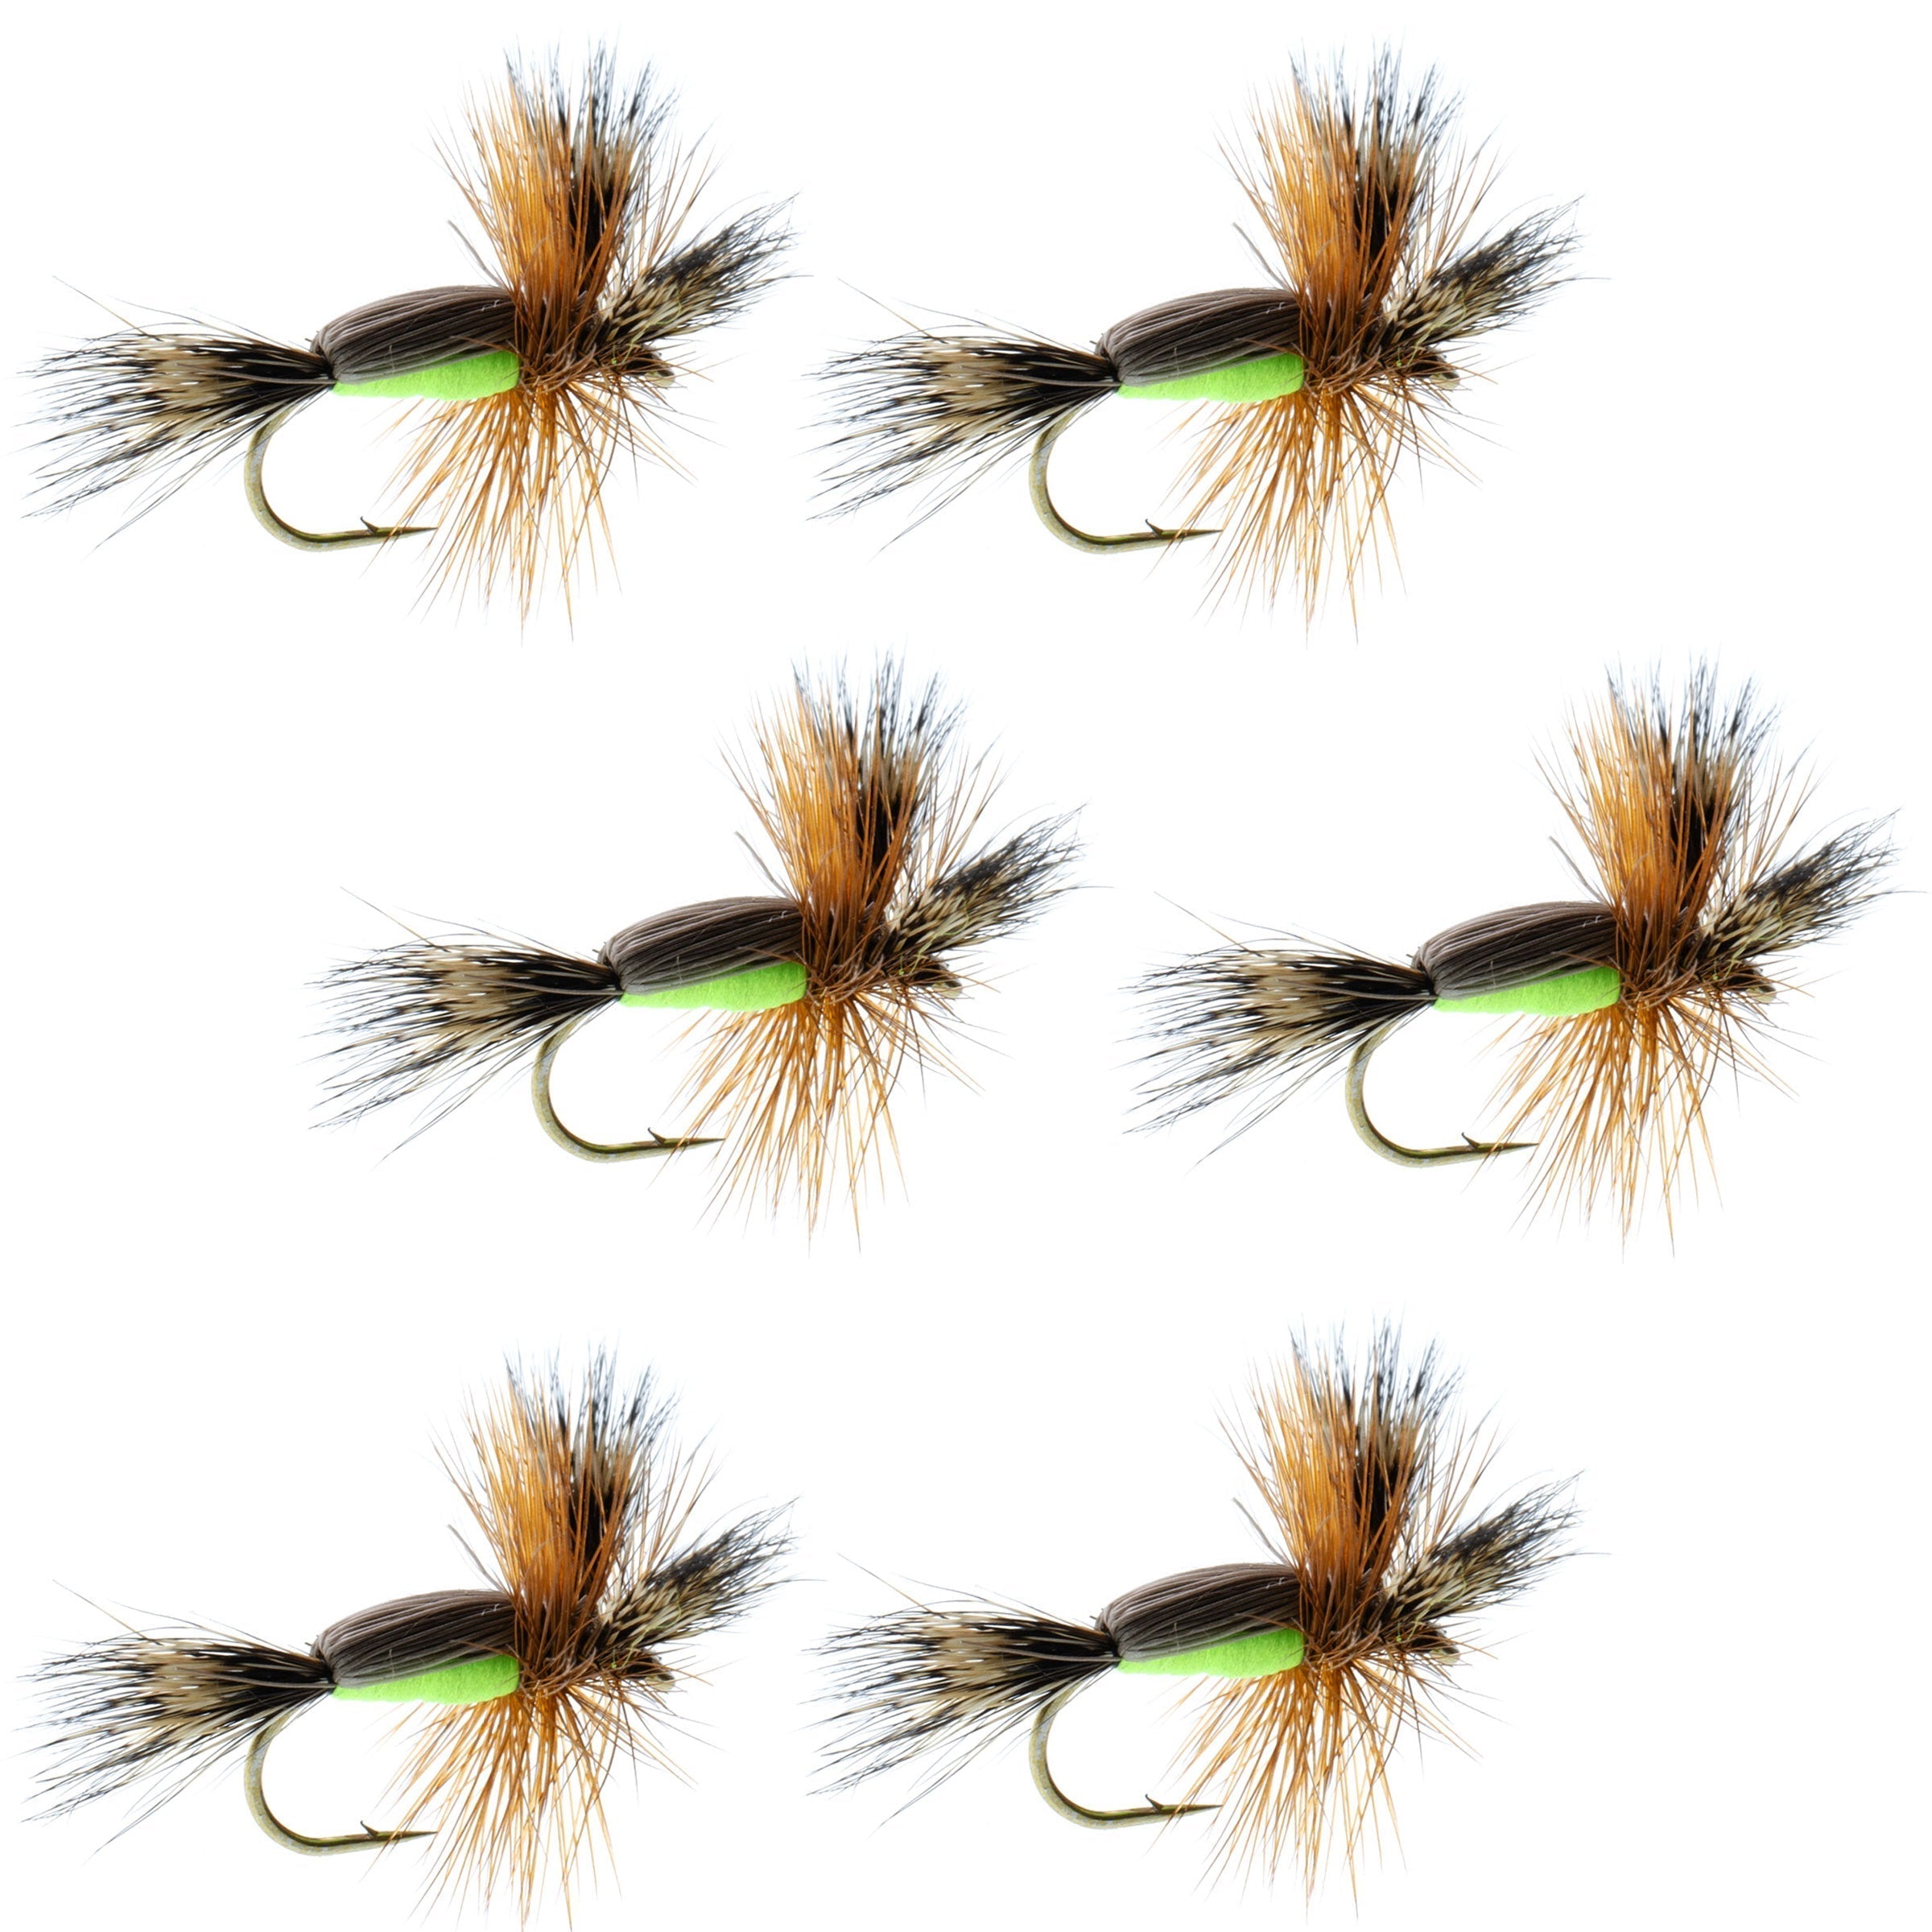 Chartreuse Humpy Classic Hair Wing Dry Fly - Gancho para 6 moscas, tamaño 10